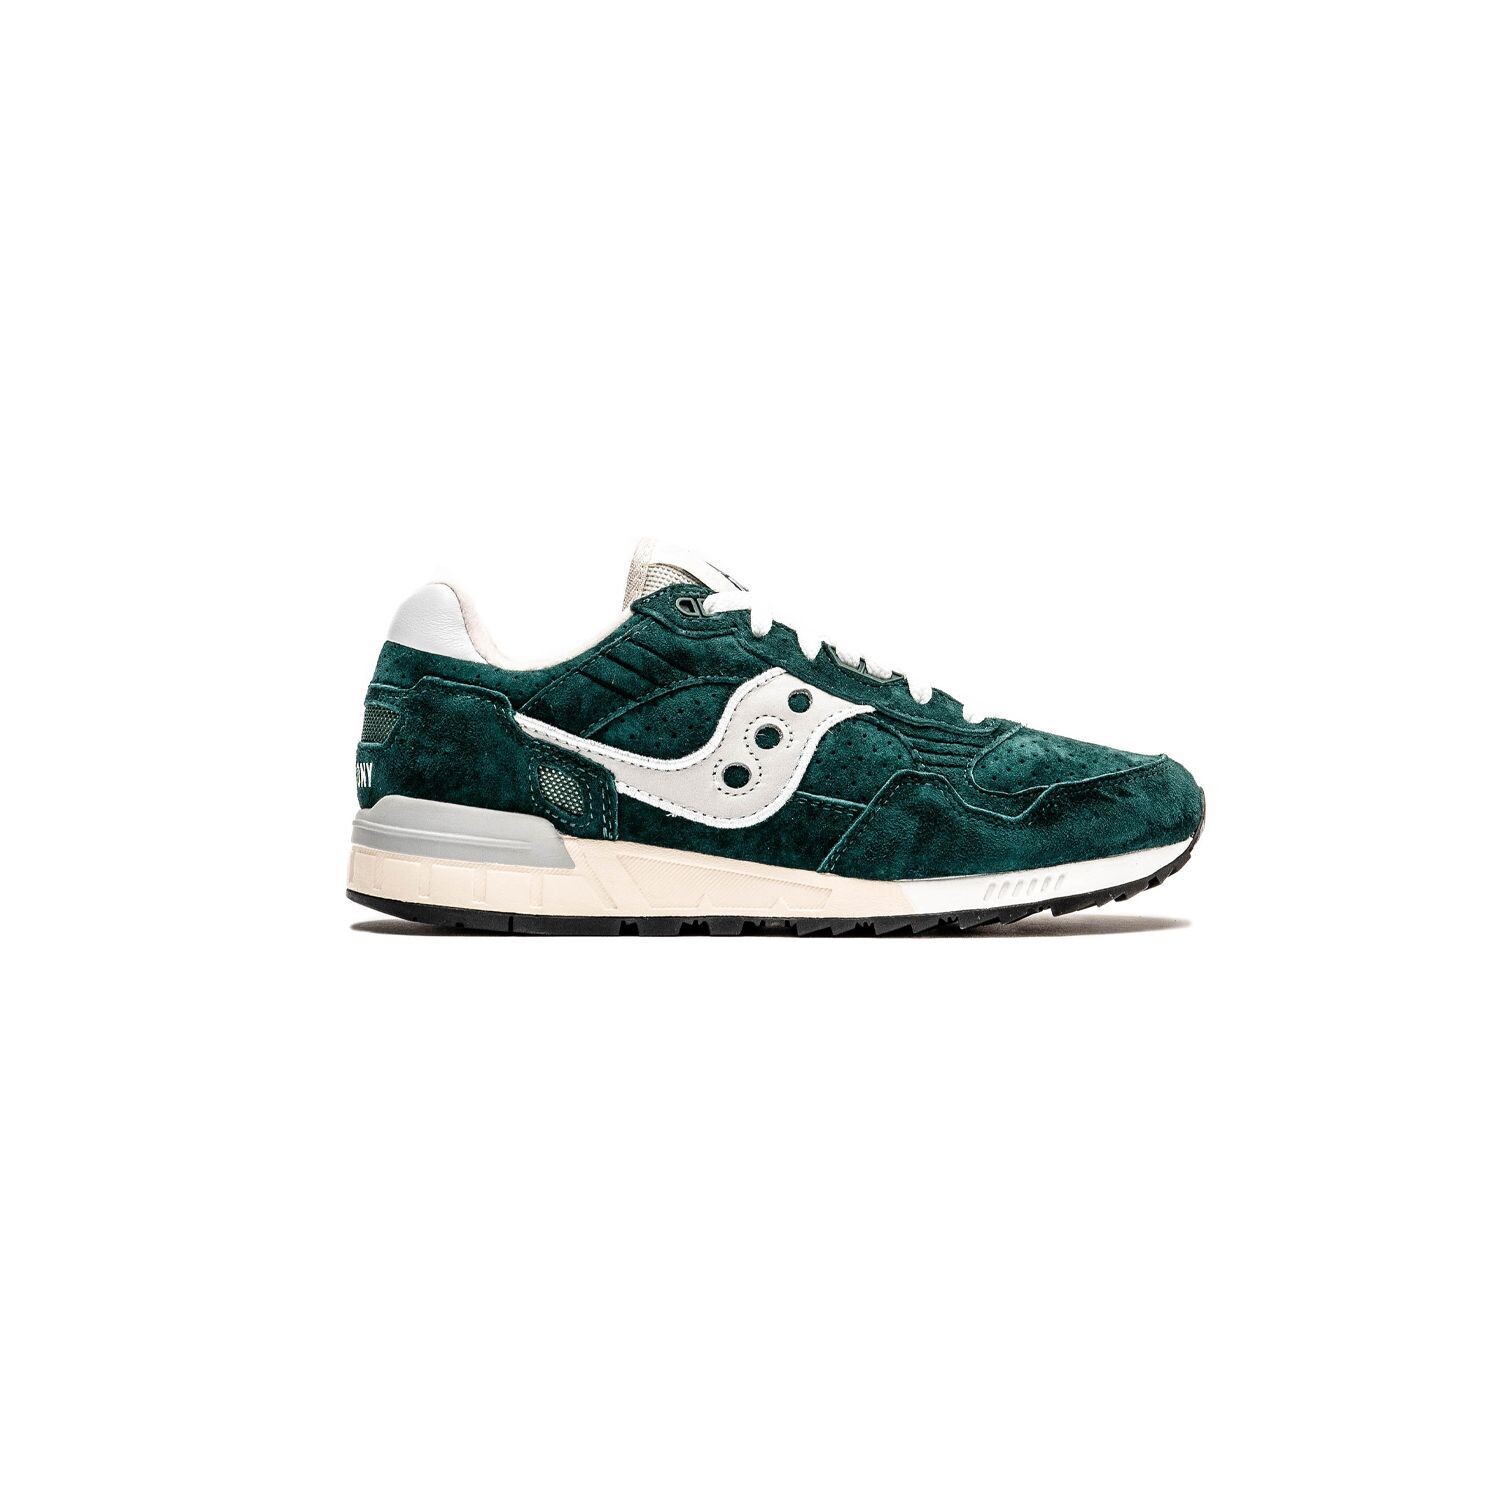 Saucony Shadow 5000 Suede "Forest"